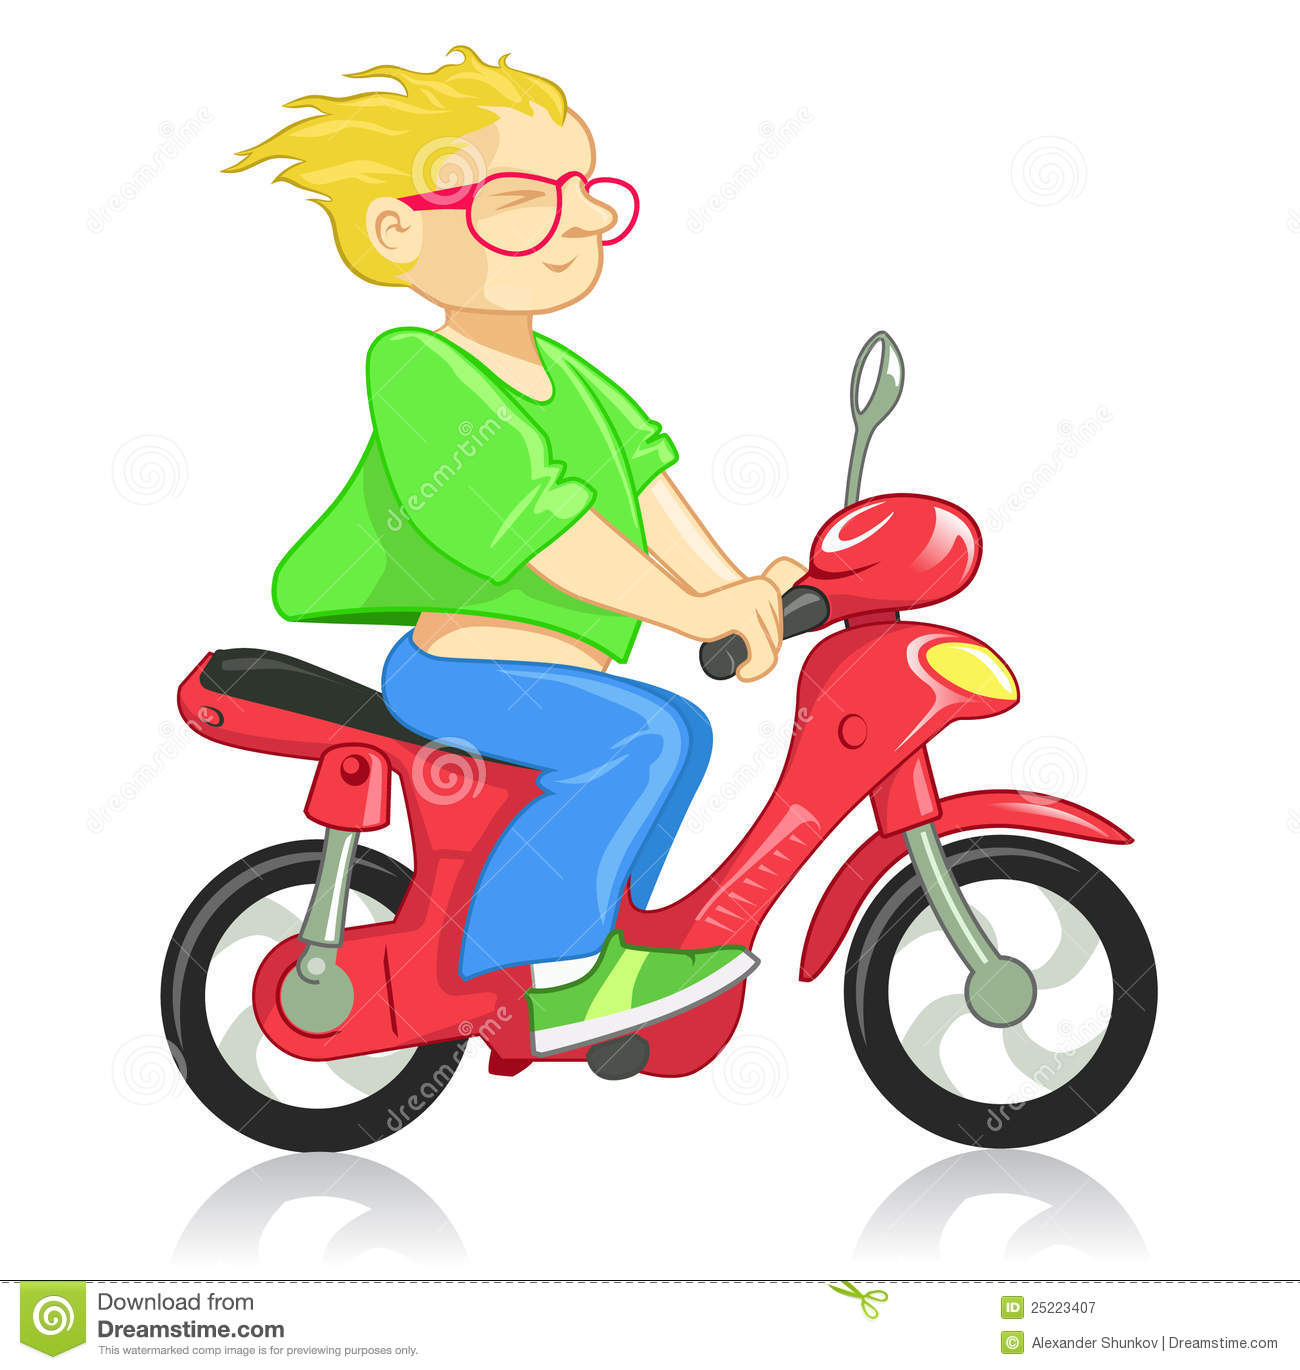 Dreamstime Comdrive Motorcycle Royalty Free Stock Photography   Image    